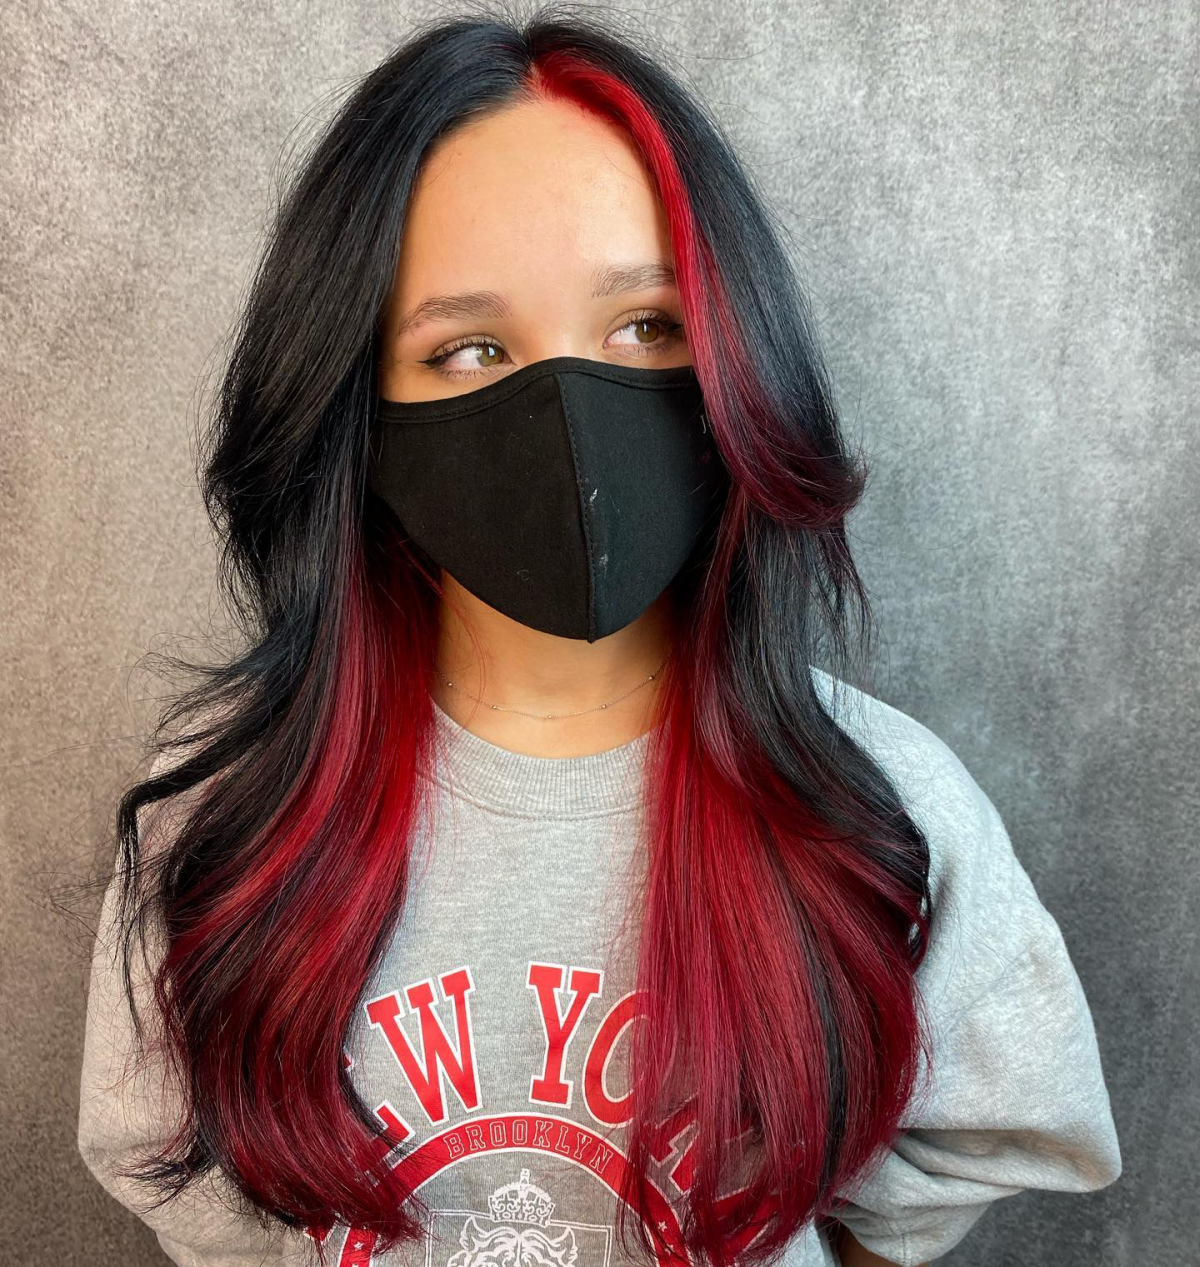 black hair with red highlights on girl